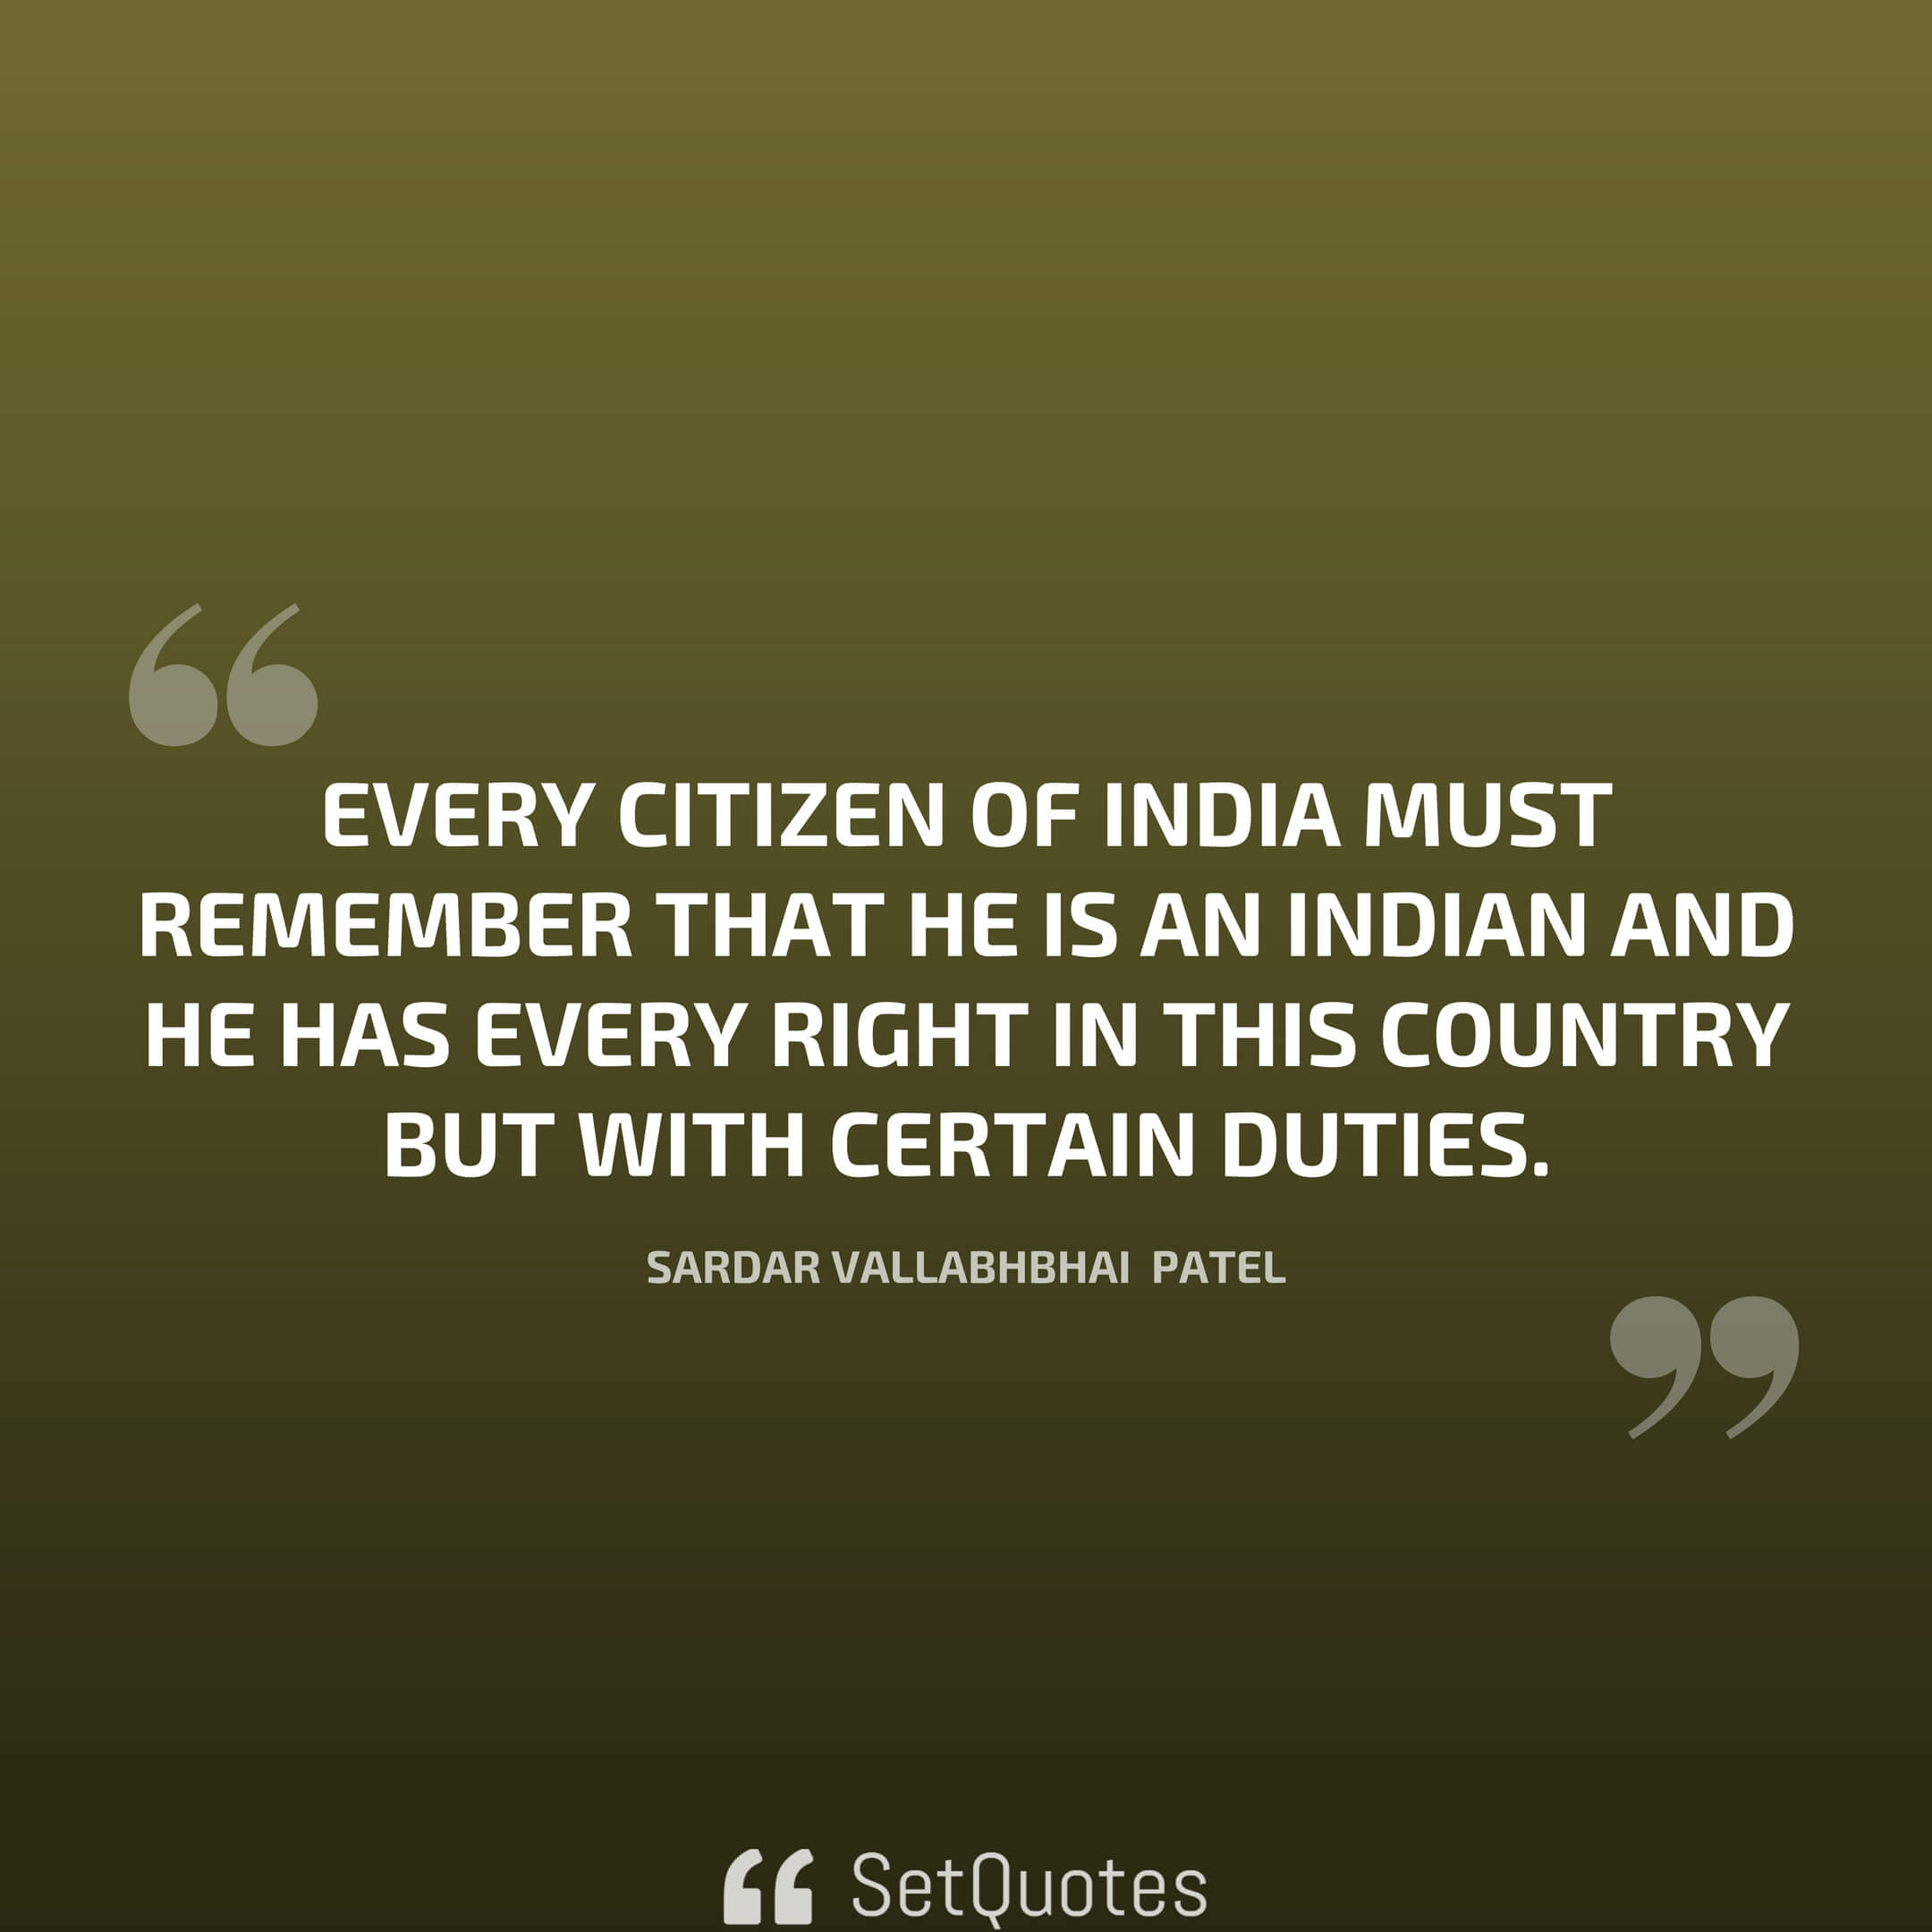 every citizen of india must remember that he is an indian and he has every right in this country but with certain duties. sardar vallabh bhai patel